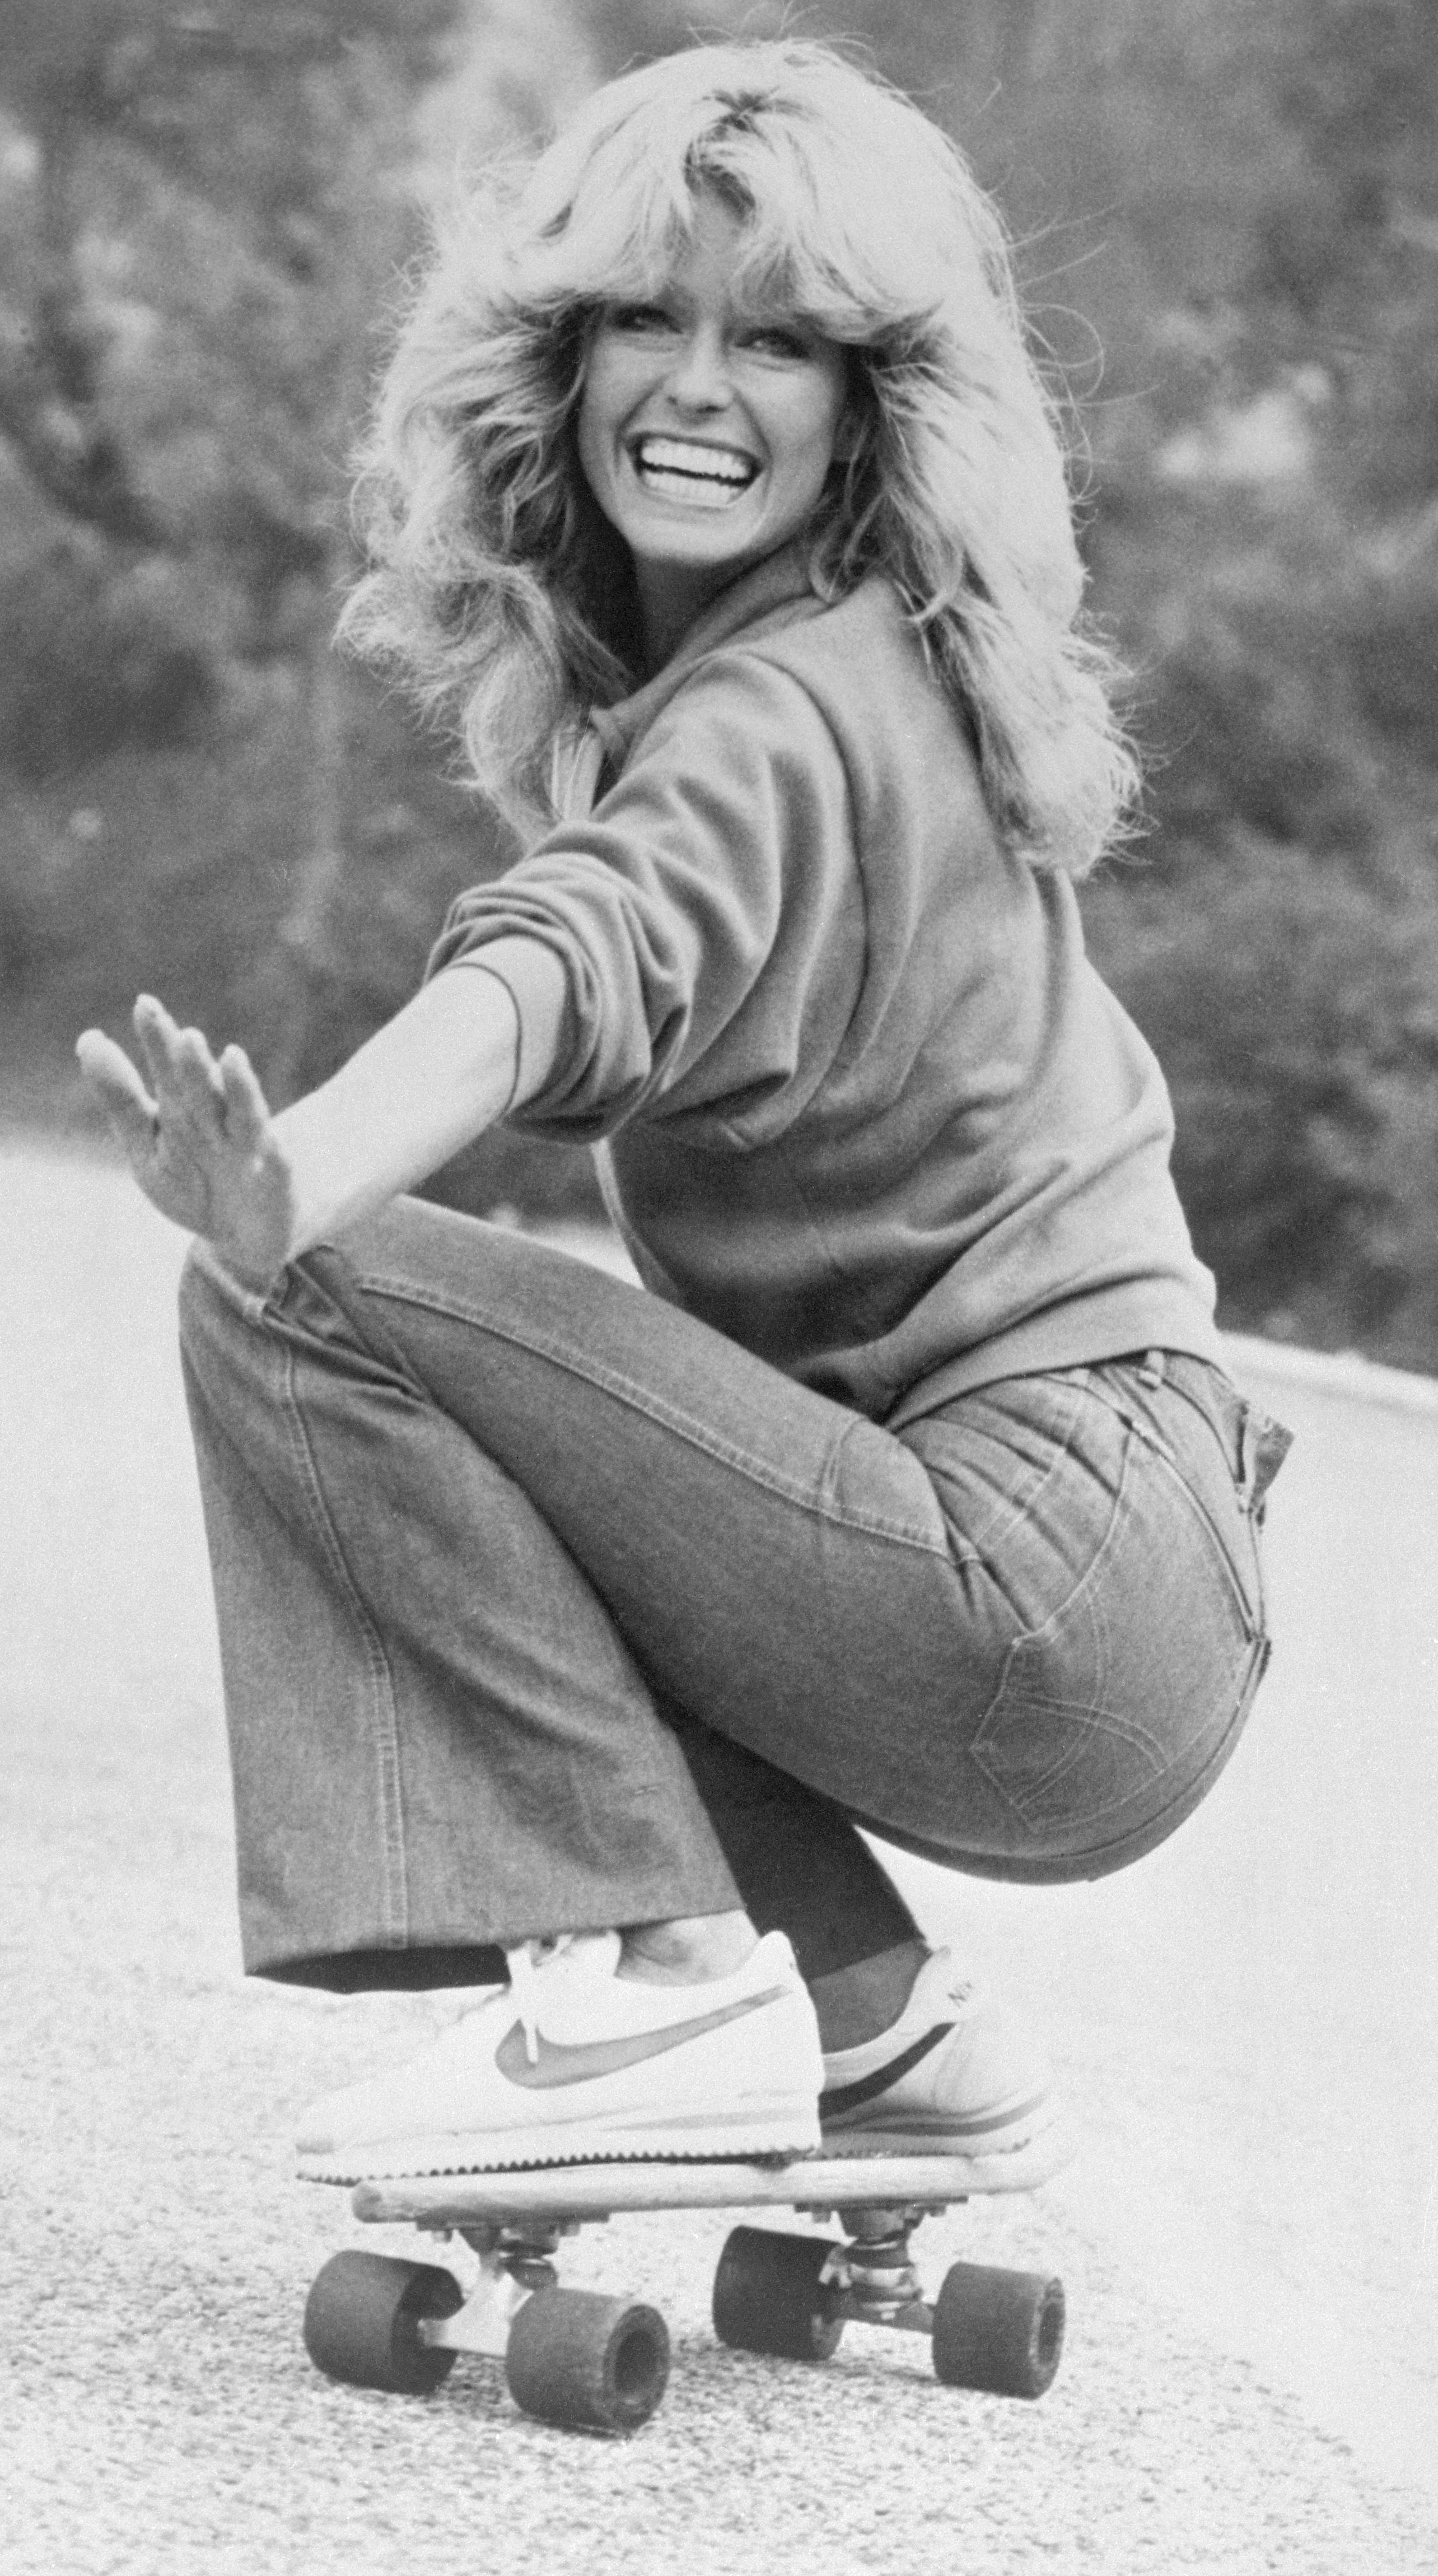 Farrah Fawcett, wearing jeans, sweatshirt and Nike athletic shoes, practices skateboarding for an episode of "Charlie's Angels" | Source: Getty Images 